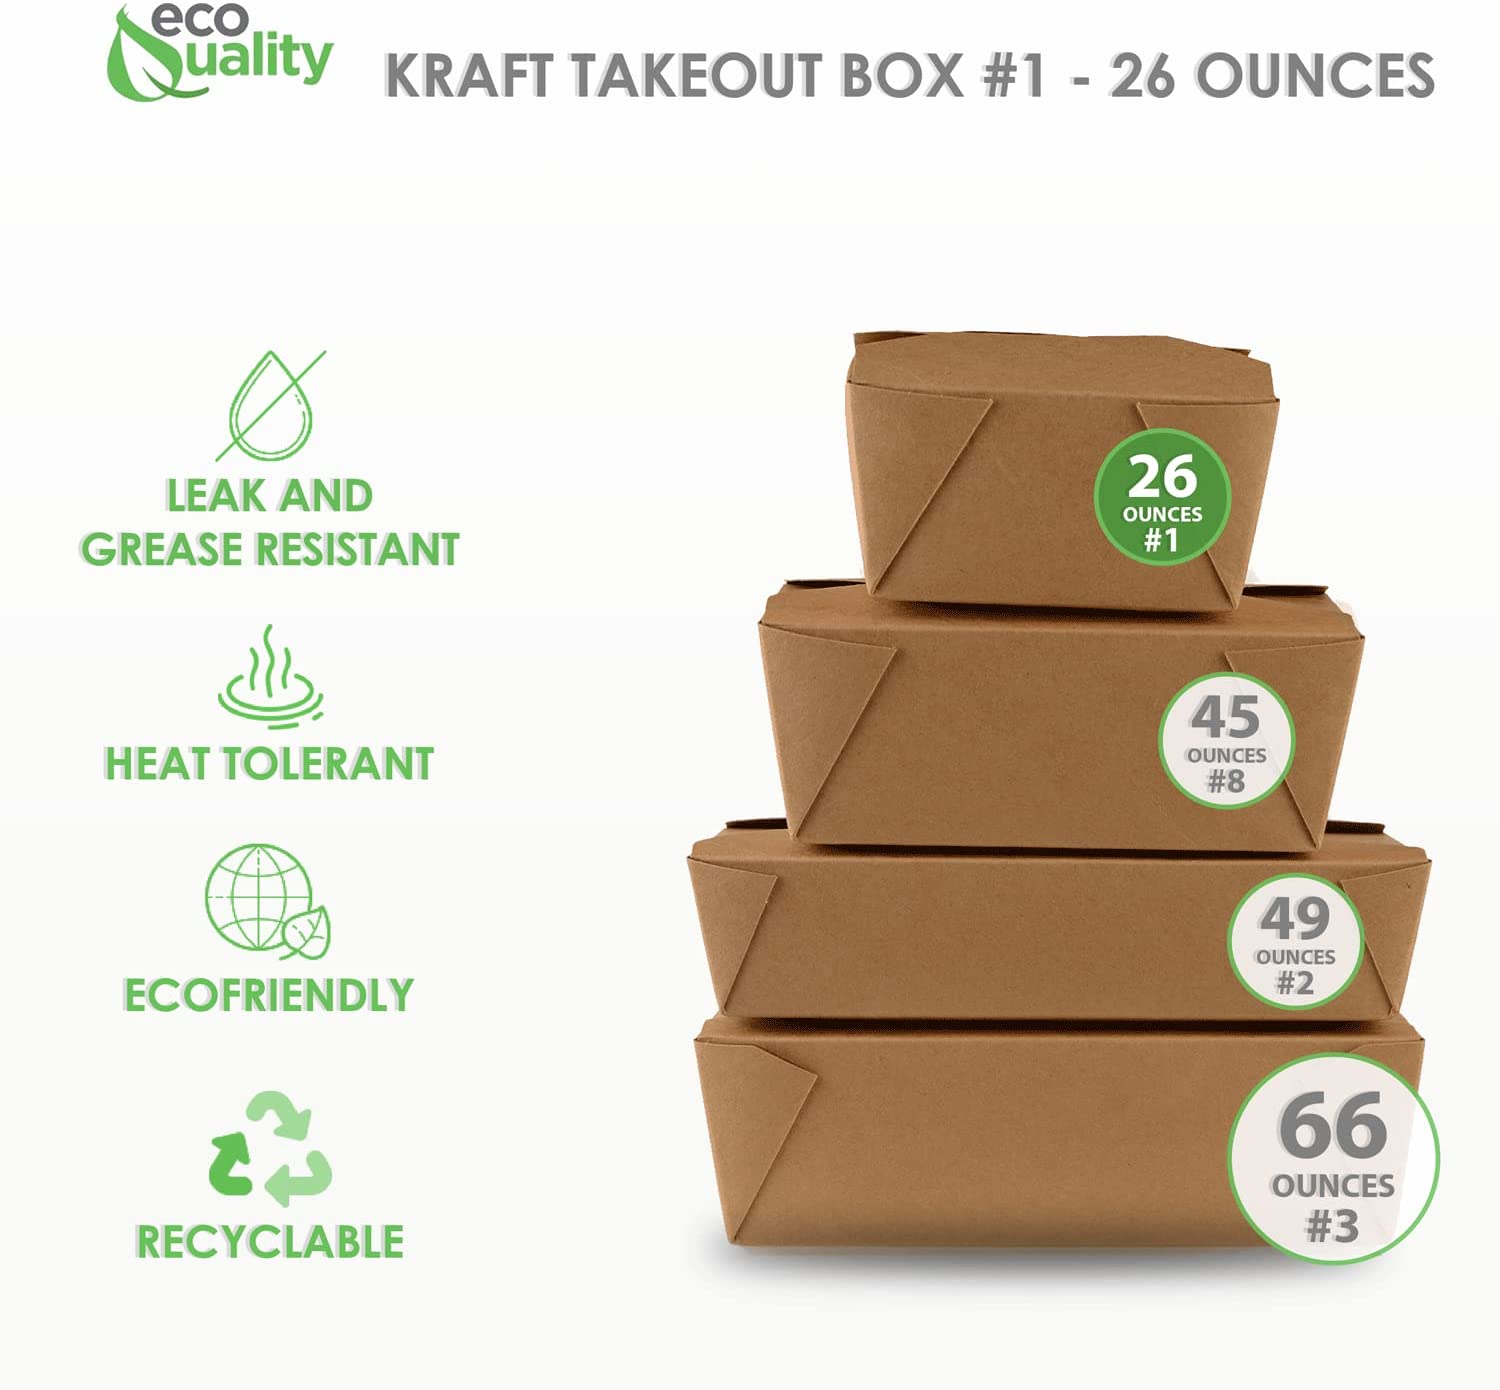 Take Out no assembly container Microwave safe Leak Resistant Kraft Paperboard Food Tray Ecofriendly container Biodegradeable Compostable Food Containers kraft lunchbox  folded to go box 26 ounce restaurant supplies food service supplies paper disposables heat resistant box  all size box